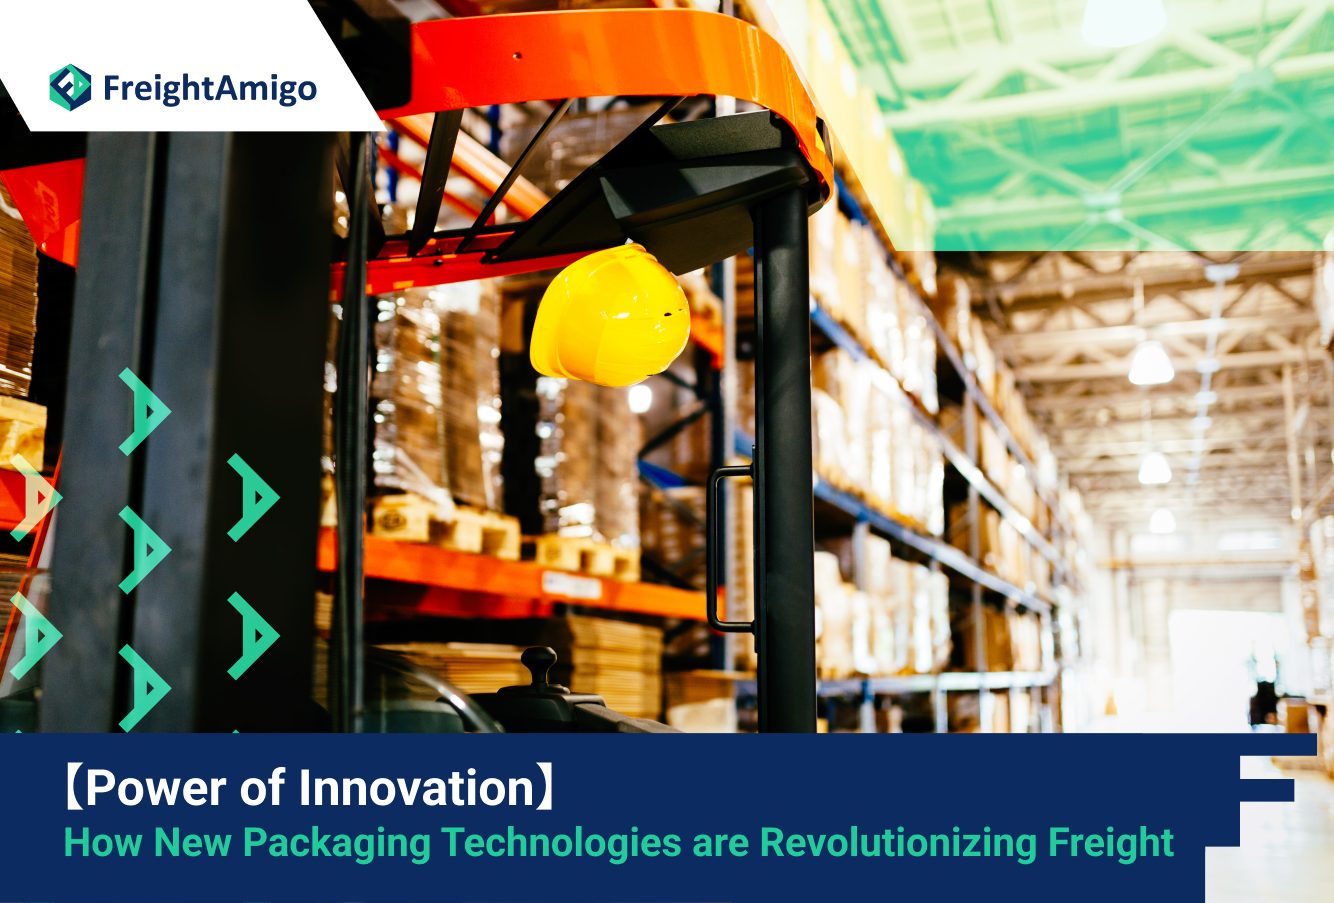 【Power of Innovation】How New Packaging Technologies are Revolutionizing Freight